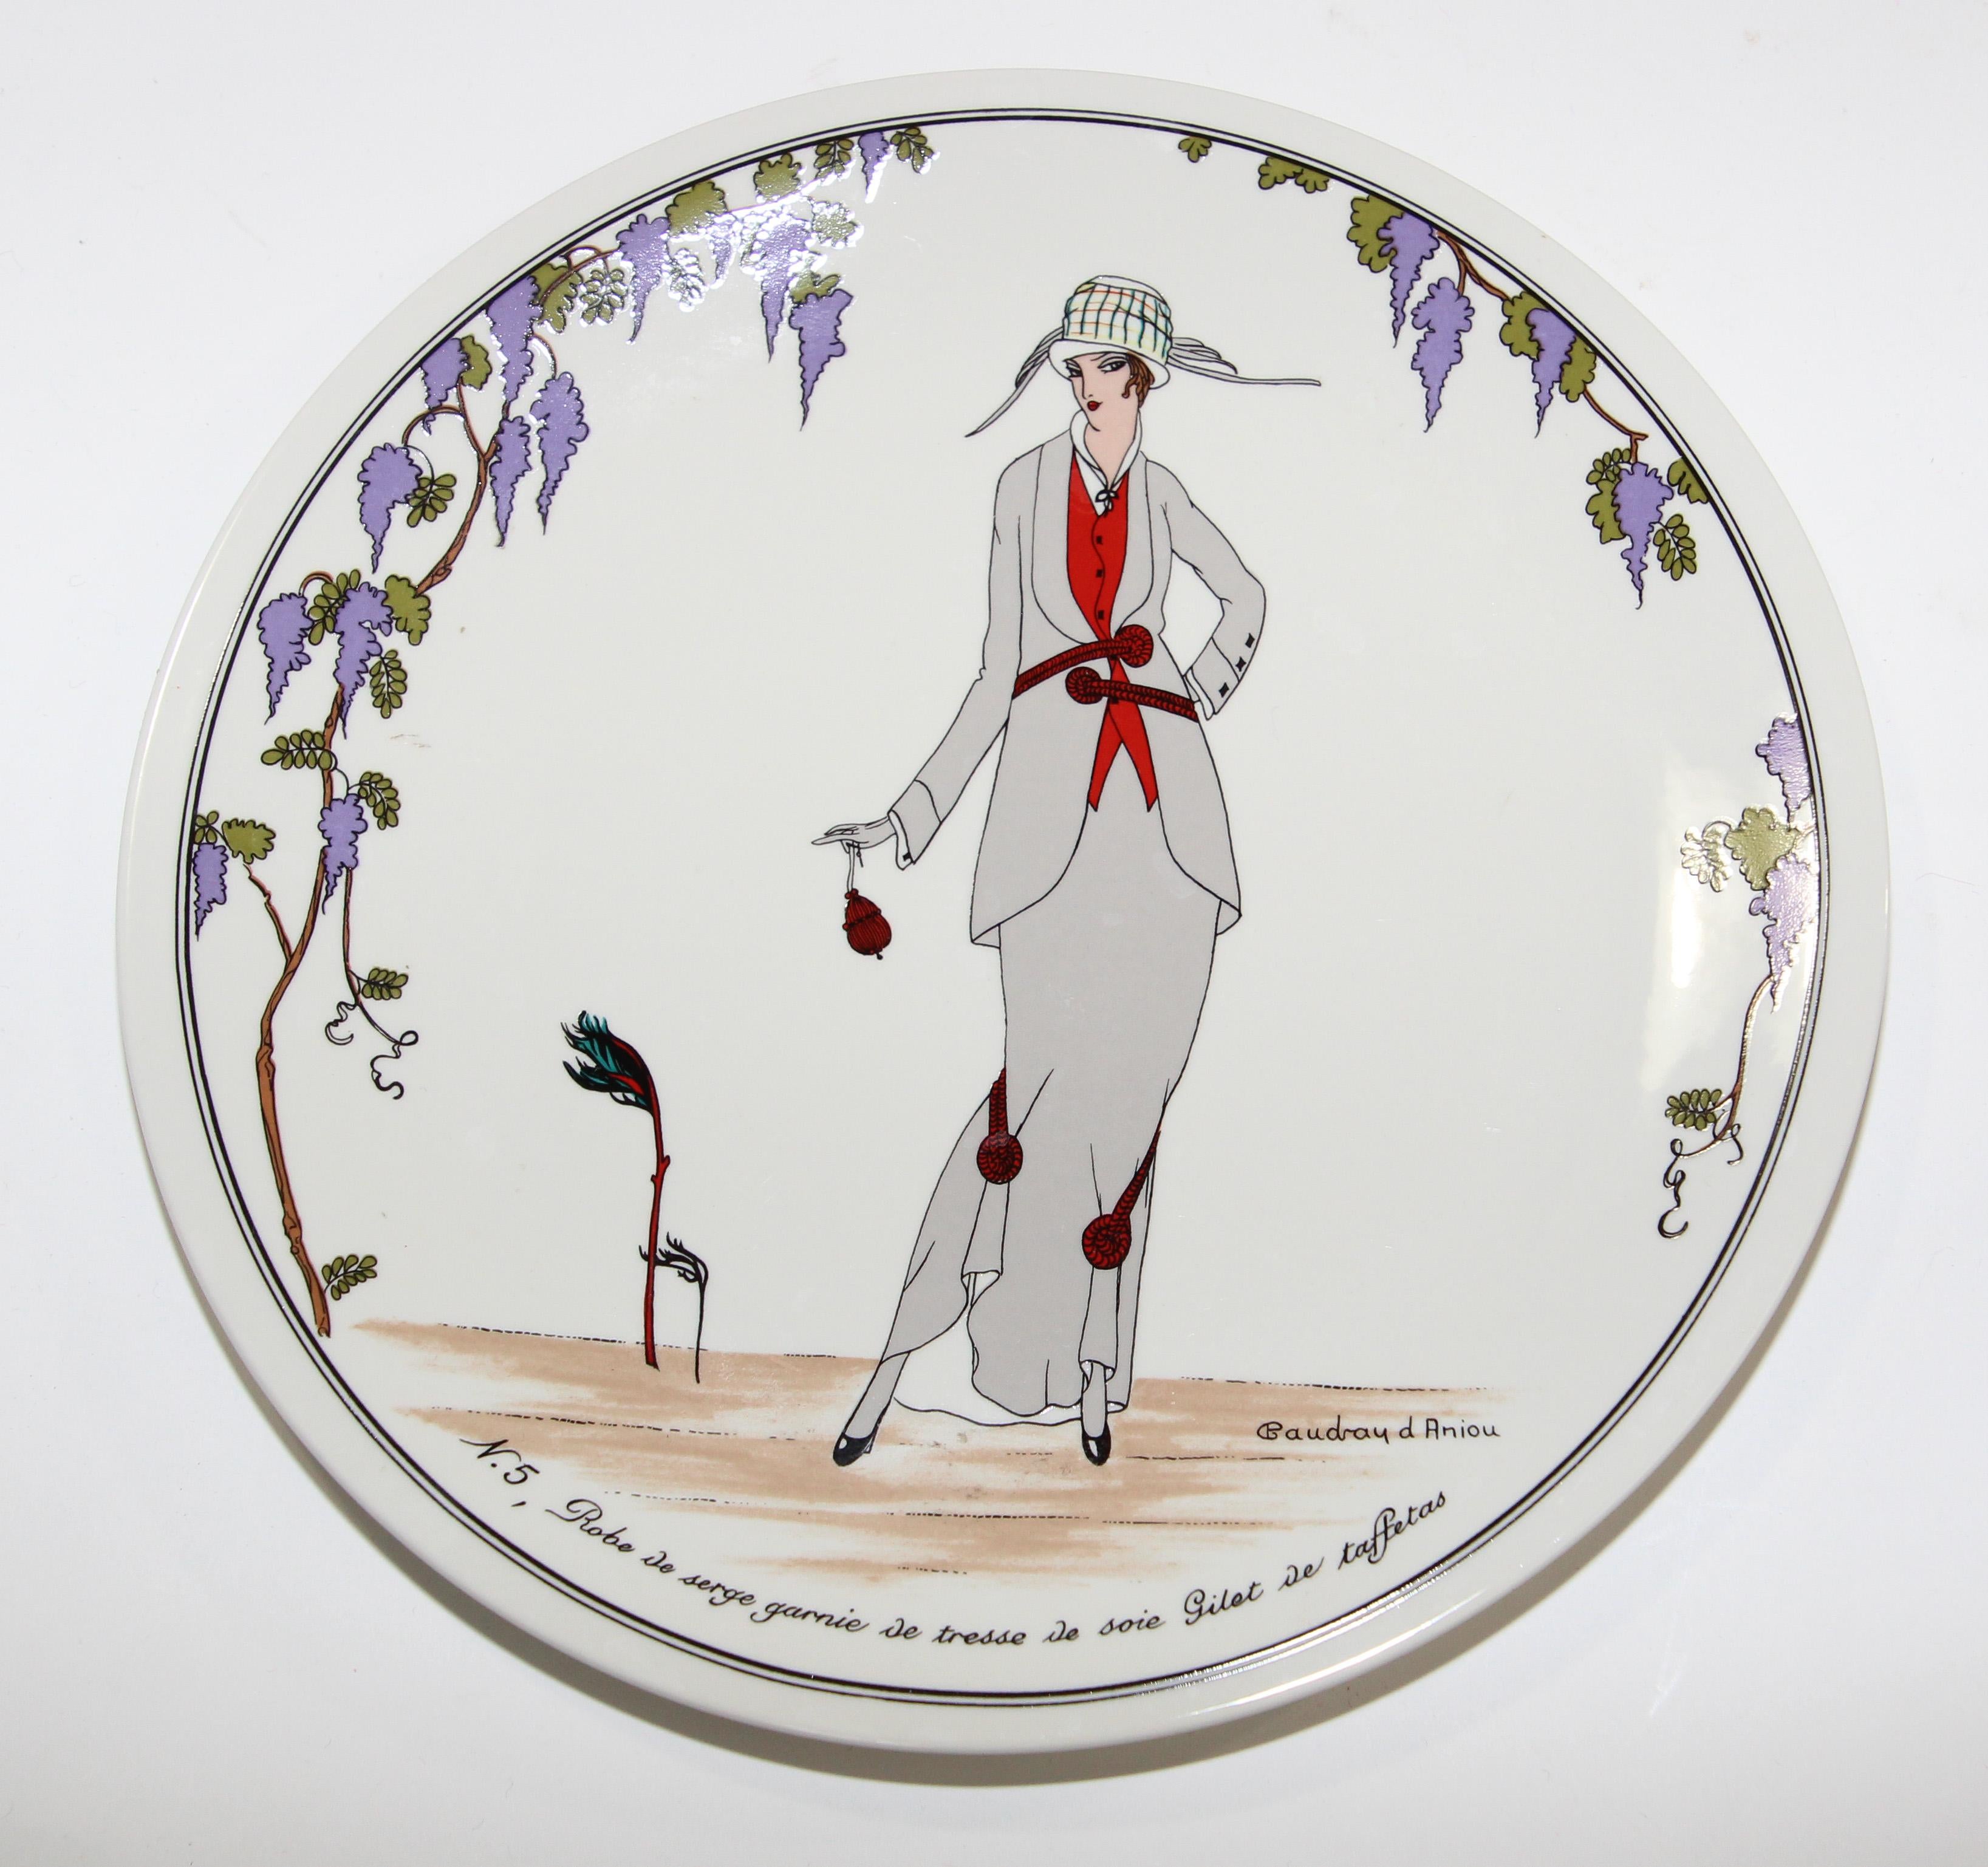 Vintage Collectible Villeroy and Boch Porcelain Plate 1900 Art Deco Design In Good Condition For Sale In North Hollywood, CA